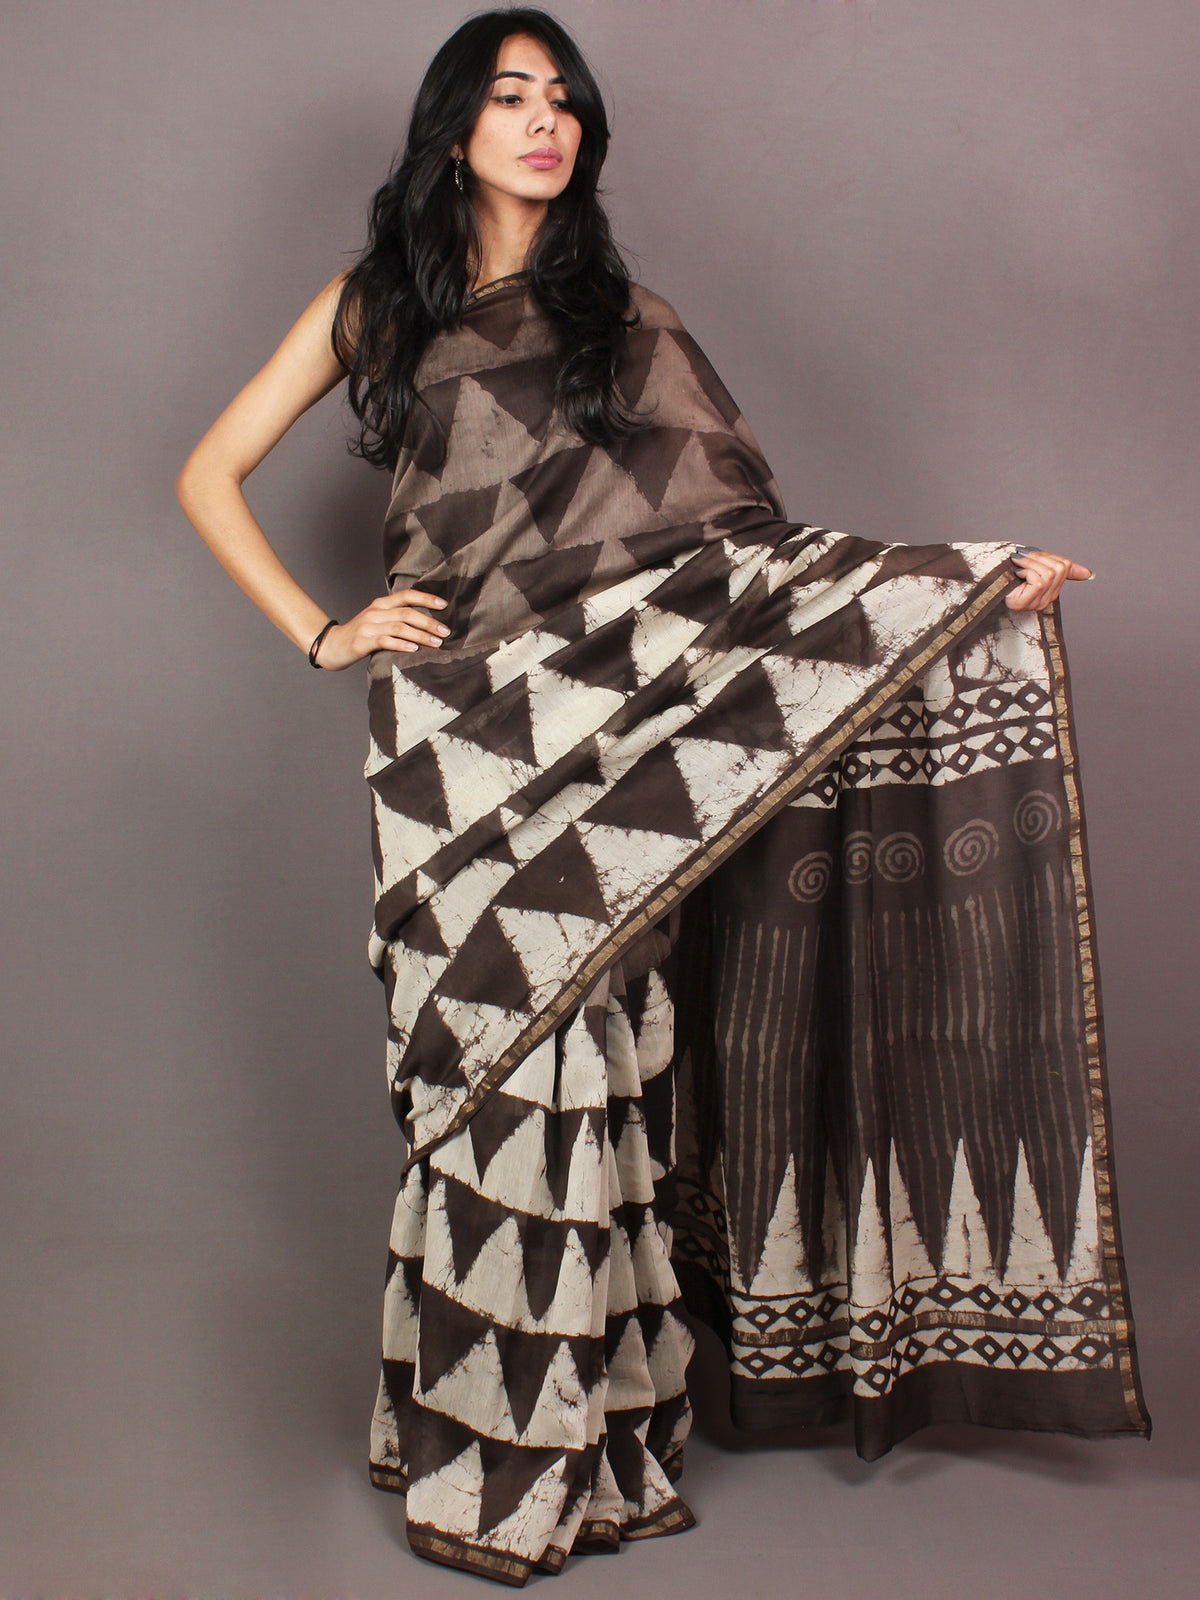 Brown Ivory White Hand Block Printed in Natural Colors Chanderi Saree - S03170856